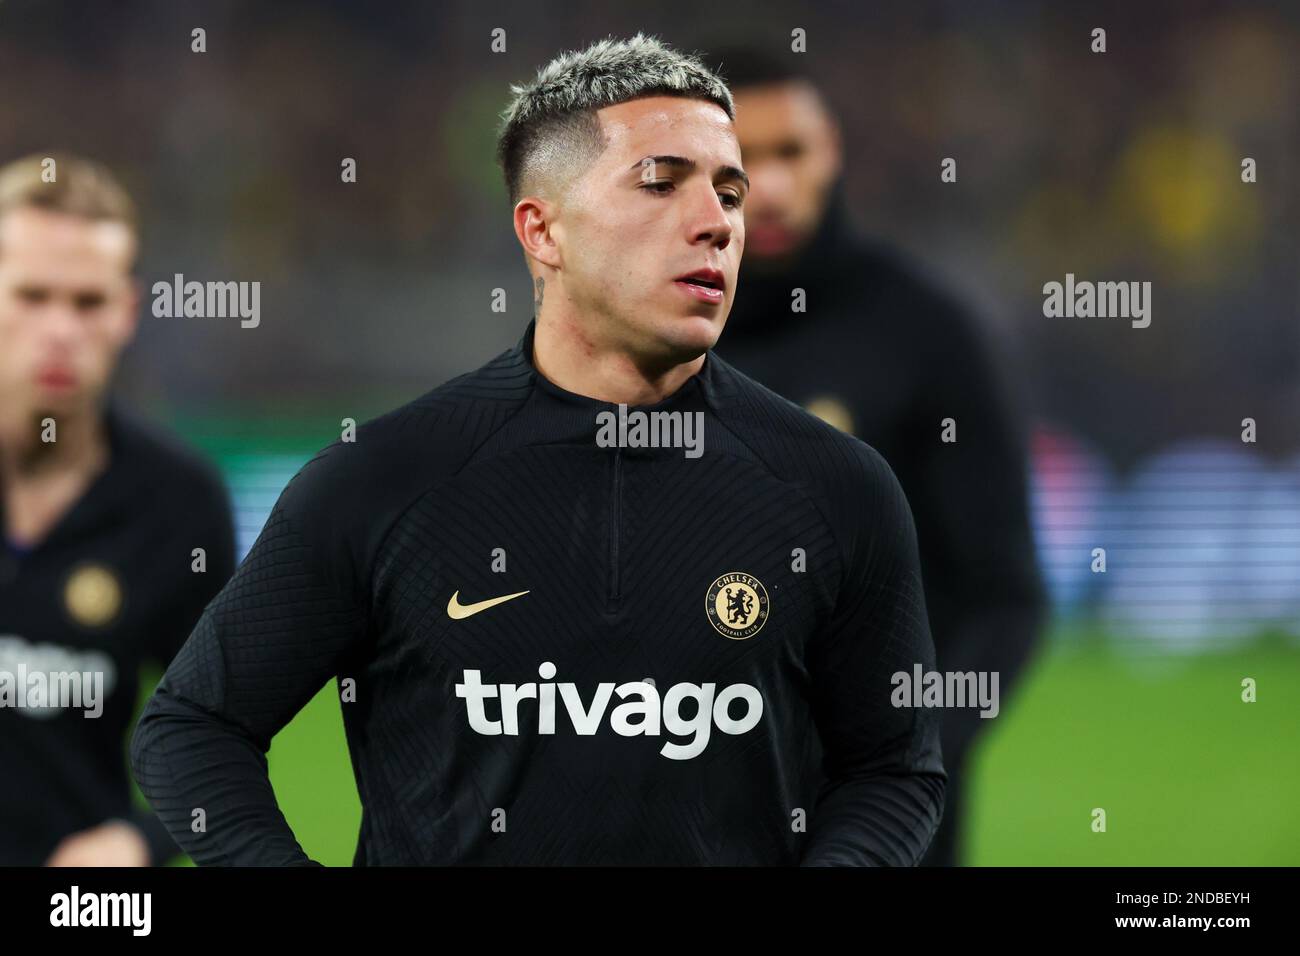 DORTMUND, GERMANY - FEBRUARY 15: Enzo Fernandez of Chelsea during the UEFA Champions Round of 16, 1st leg match between Borussia Dortmund and Chelsea at Signal Iduna Park on February 15, 2023 in Dortmund, Germany (Photo by Marcel ter Bals/Orange Pictures) Stock Photo